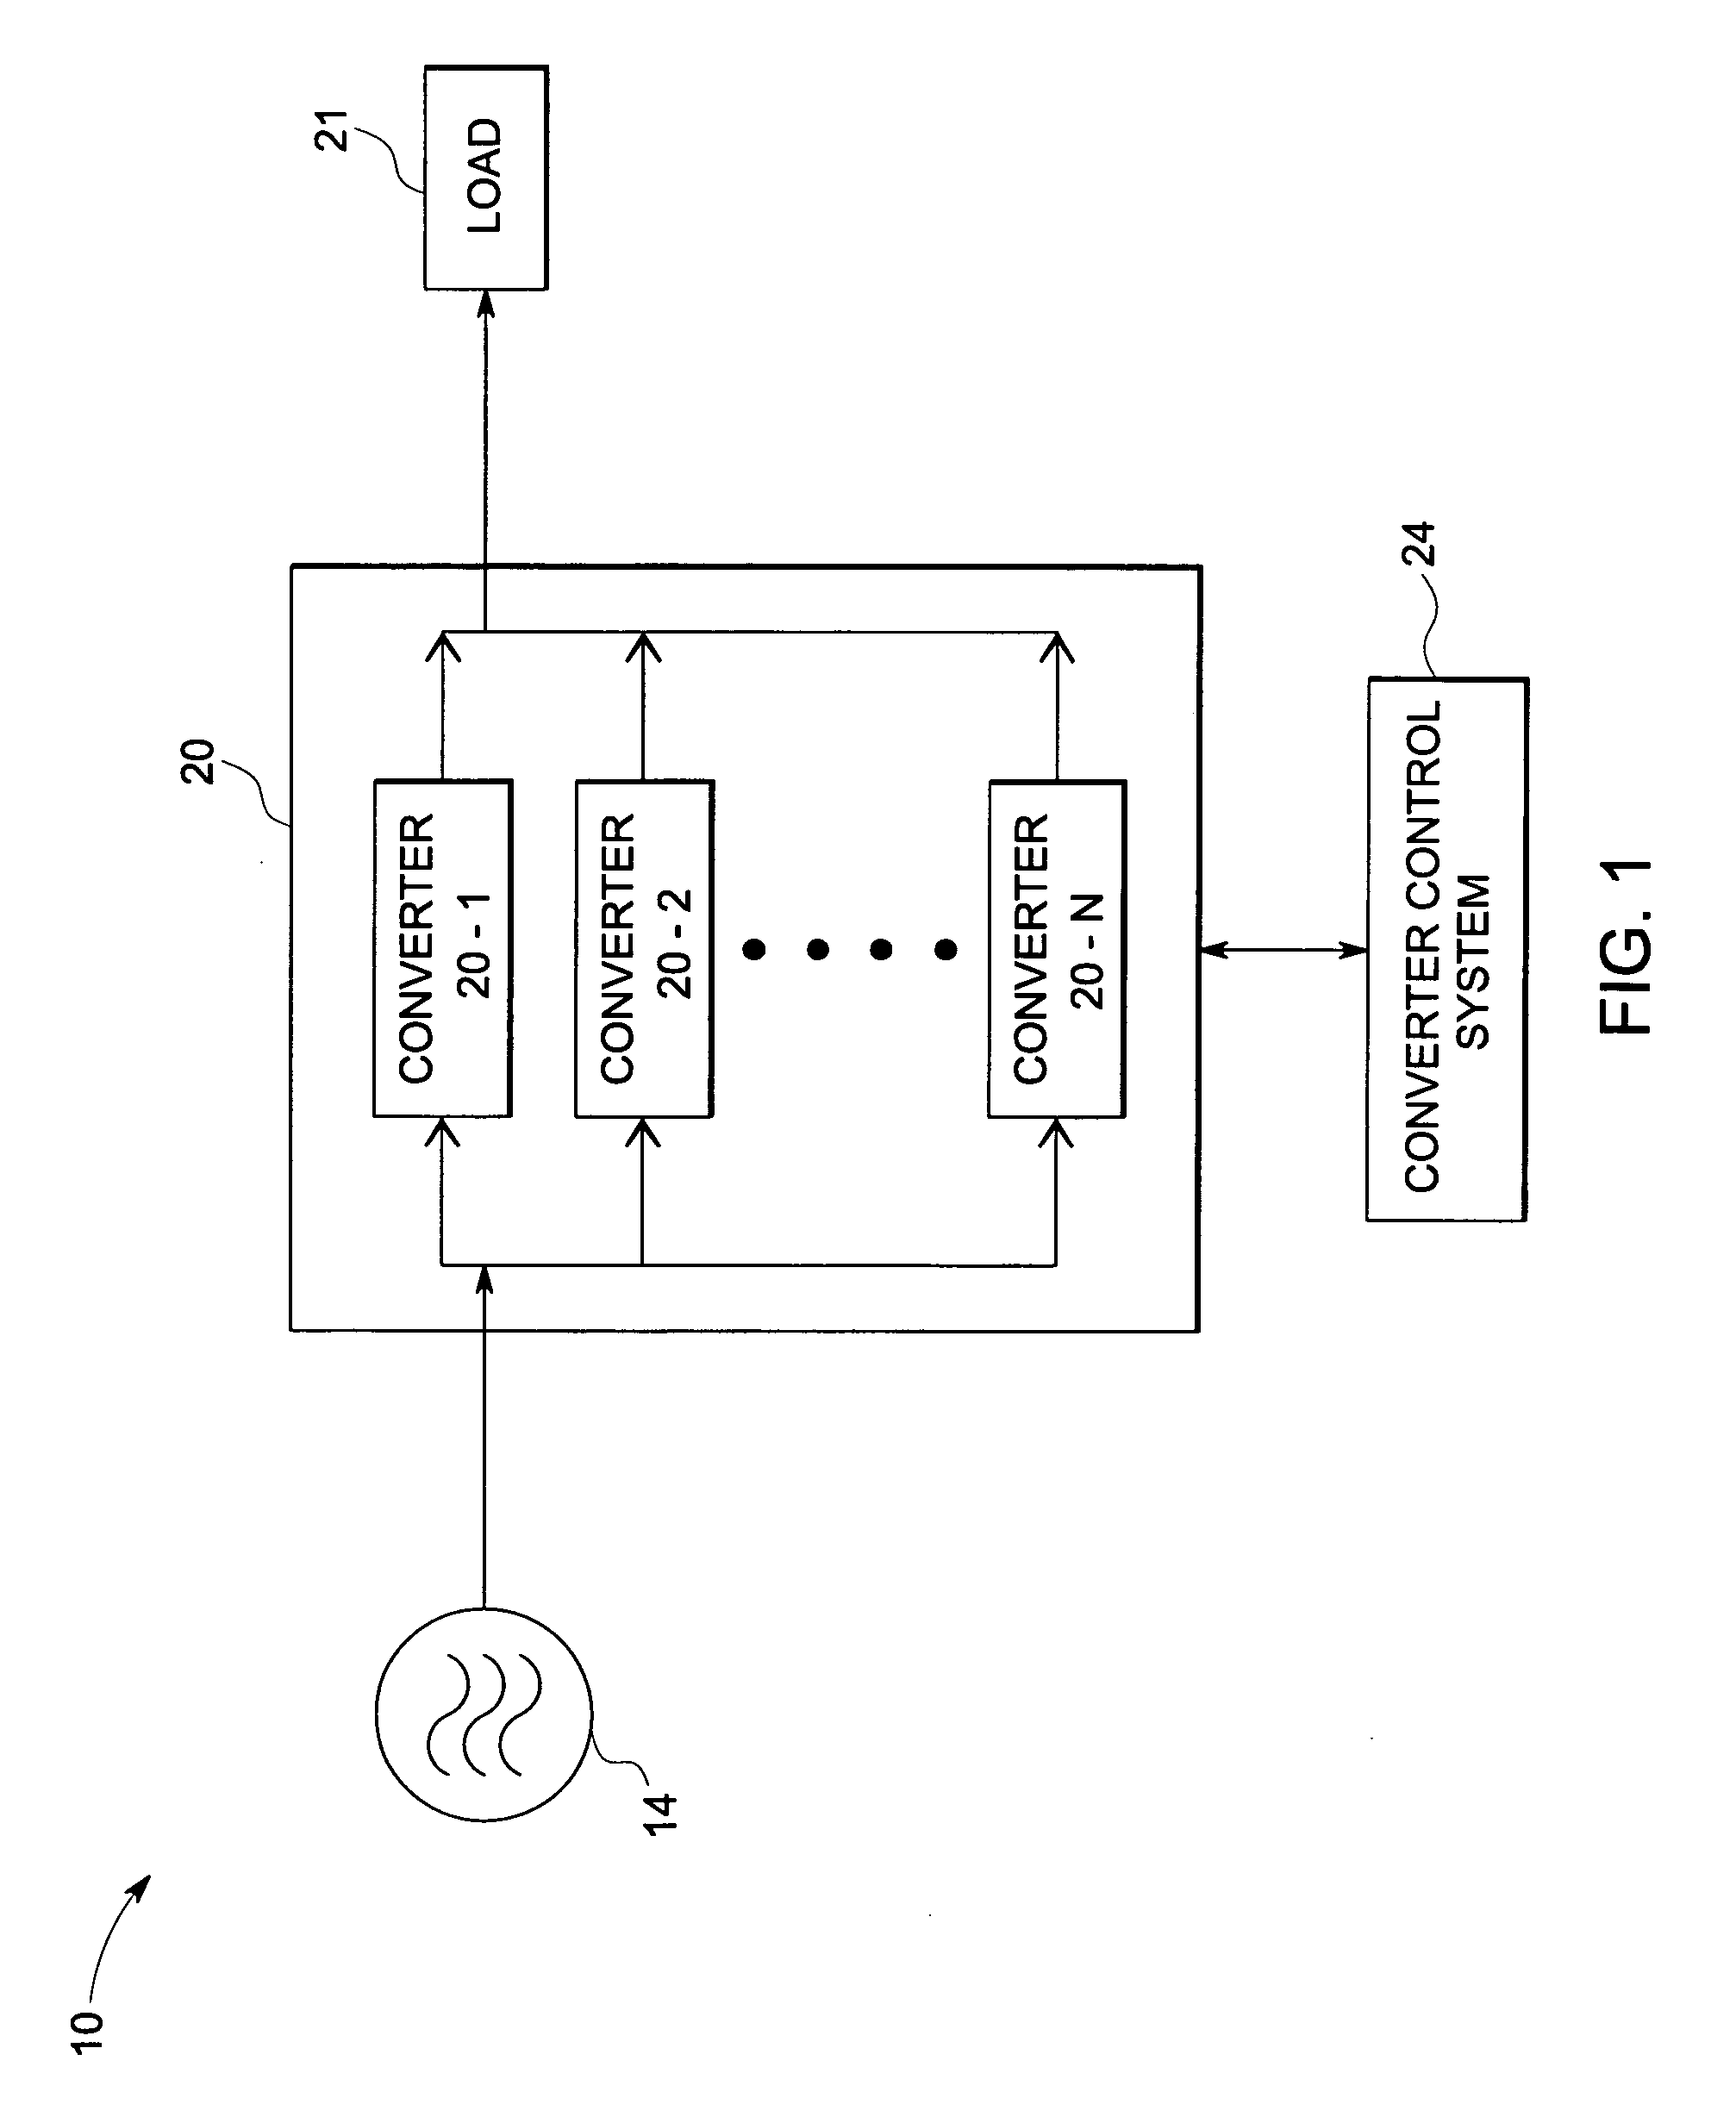 Power converter system and method